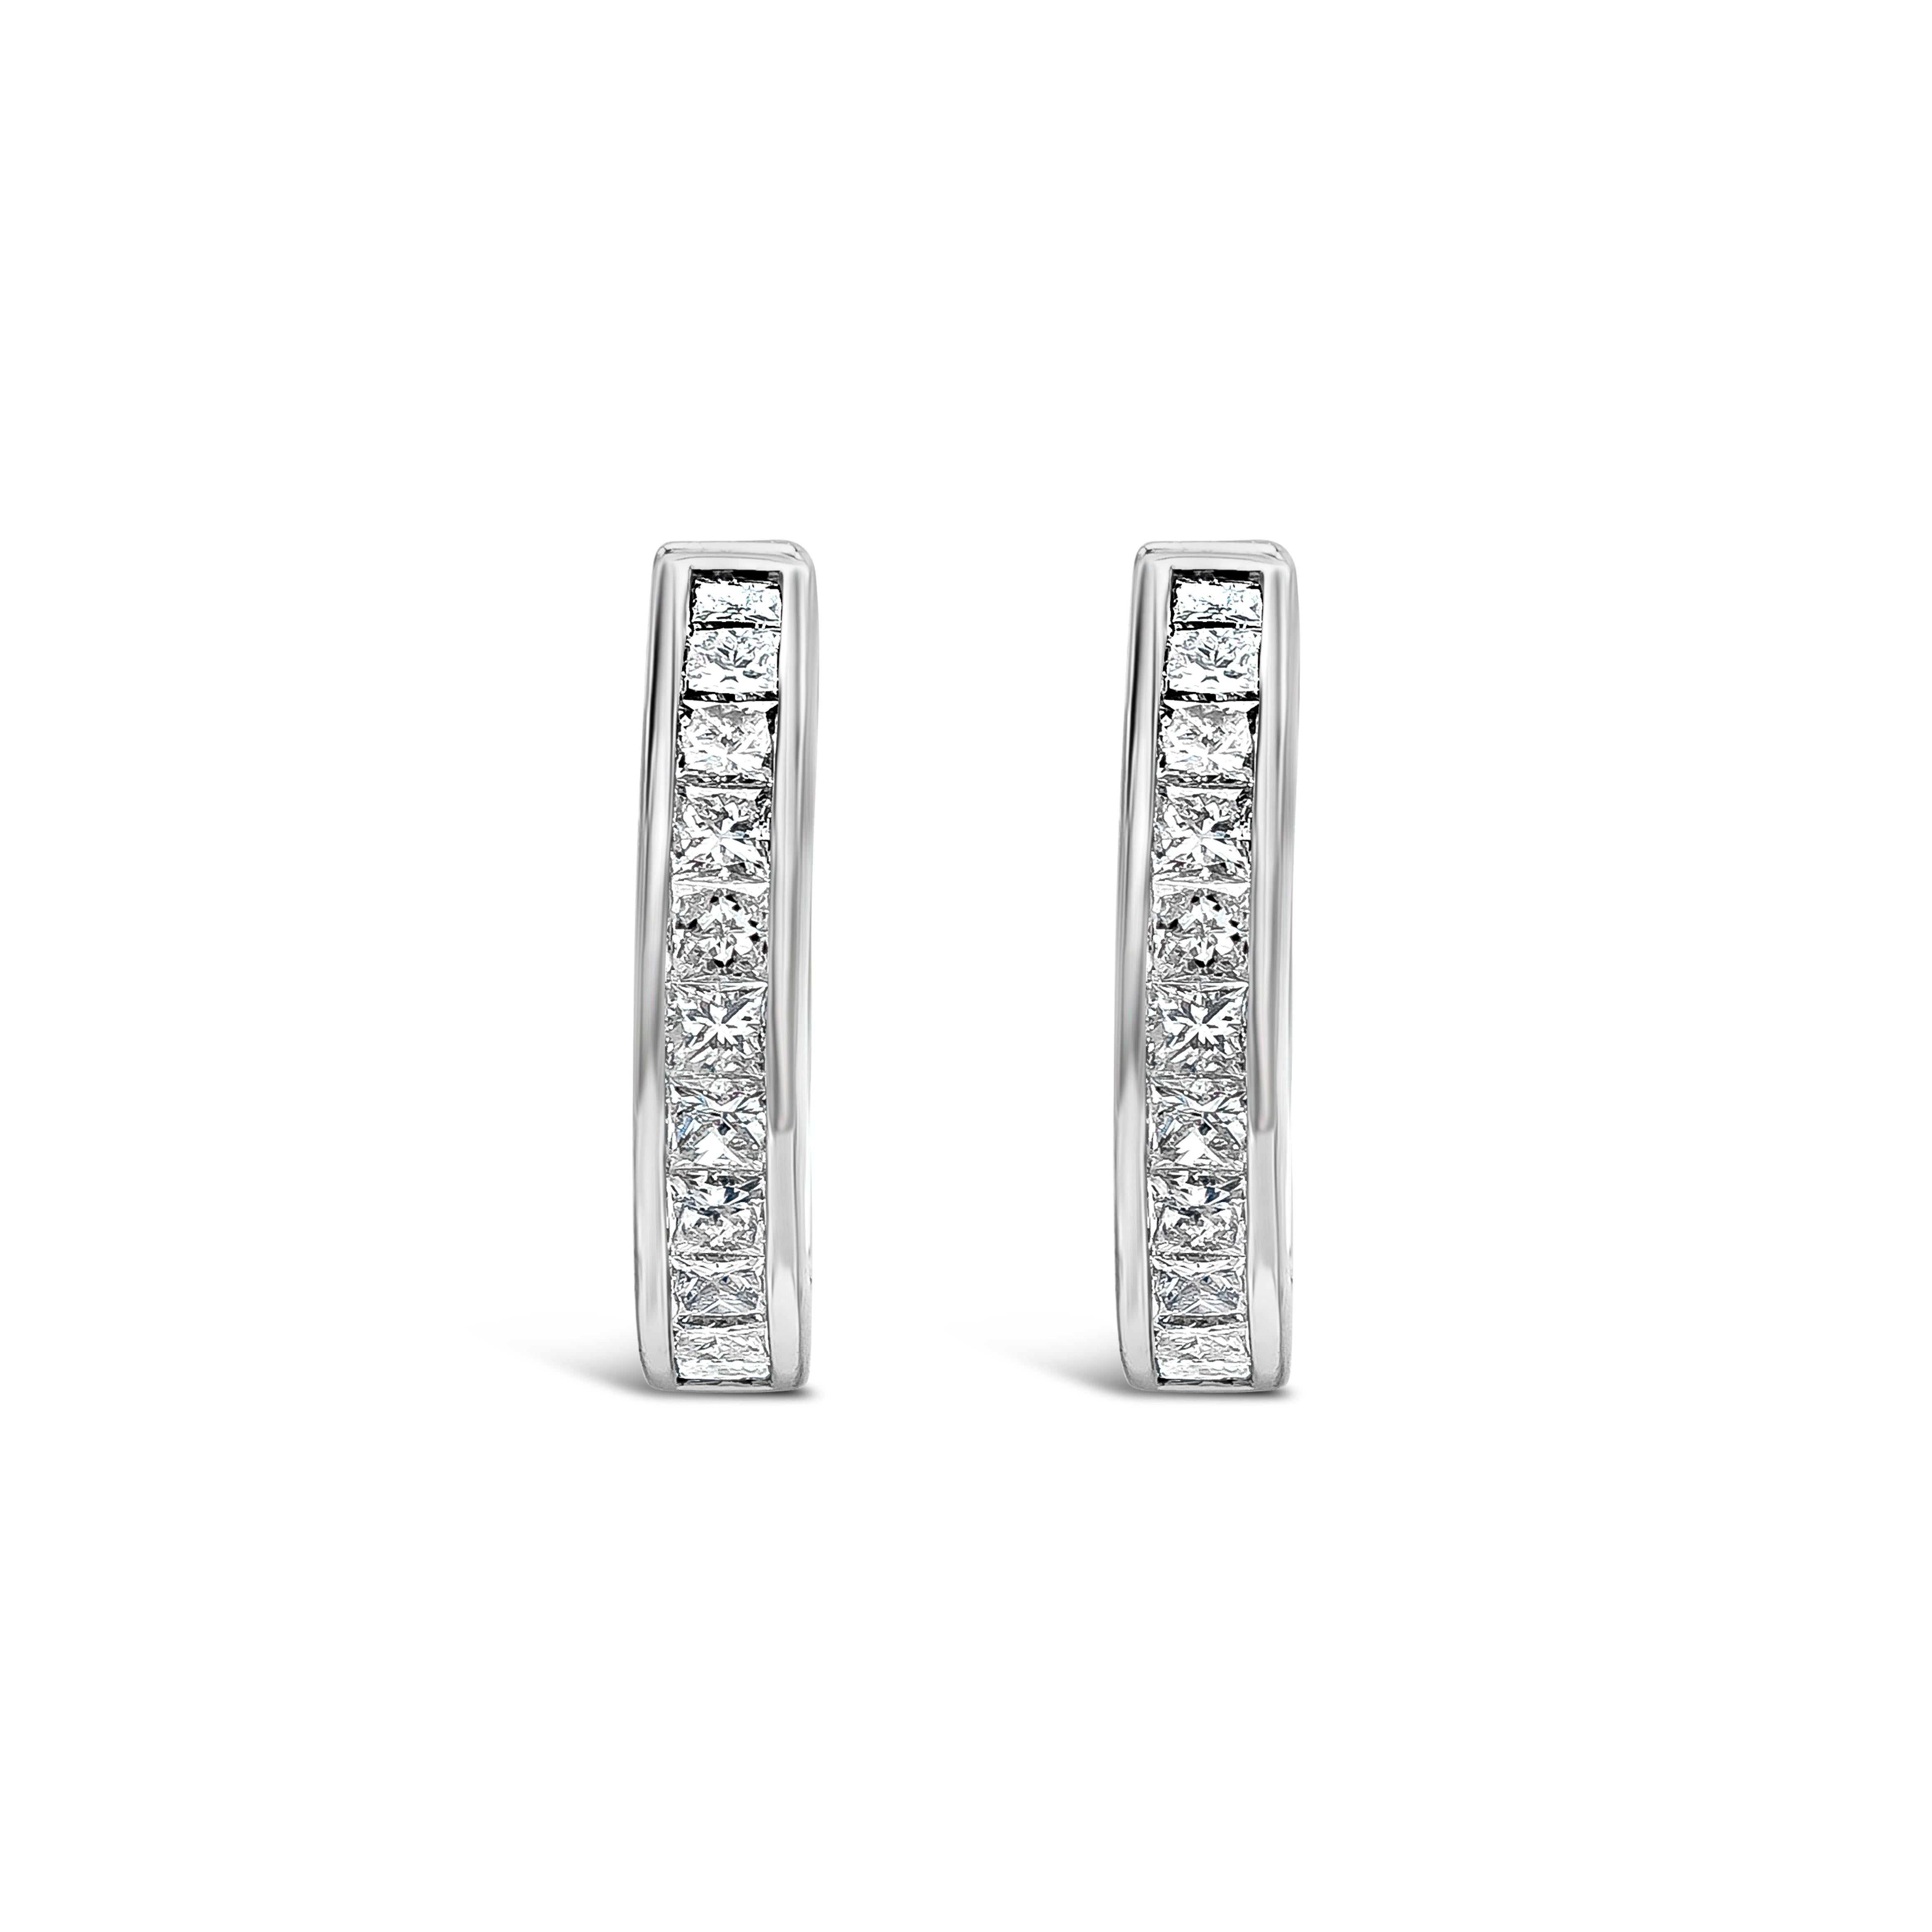 A simple pair of hoop earrings showcasing a row of 22 princess cut diamonds, channel set in an 18k white gold mounting. Diamonds weigh 0.50 carats total, F color and VS in clarity.

Style available in different price ranges. Prices are based on